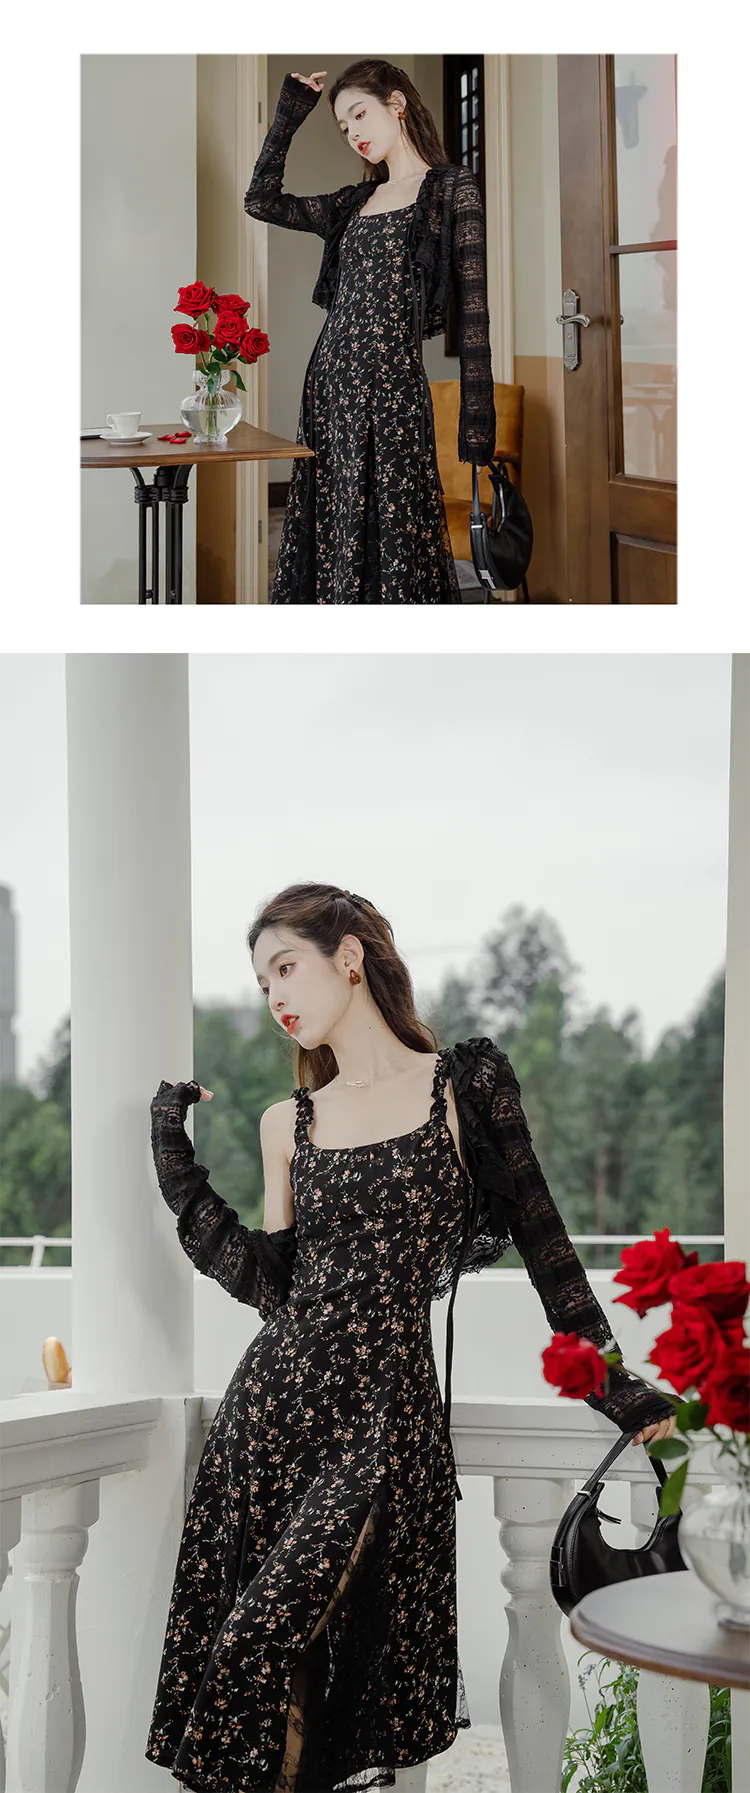 Sweet-Ladies-Black-Lace-Patchwork-Floral-Camisole-Dress-with-Cardigan10